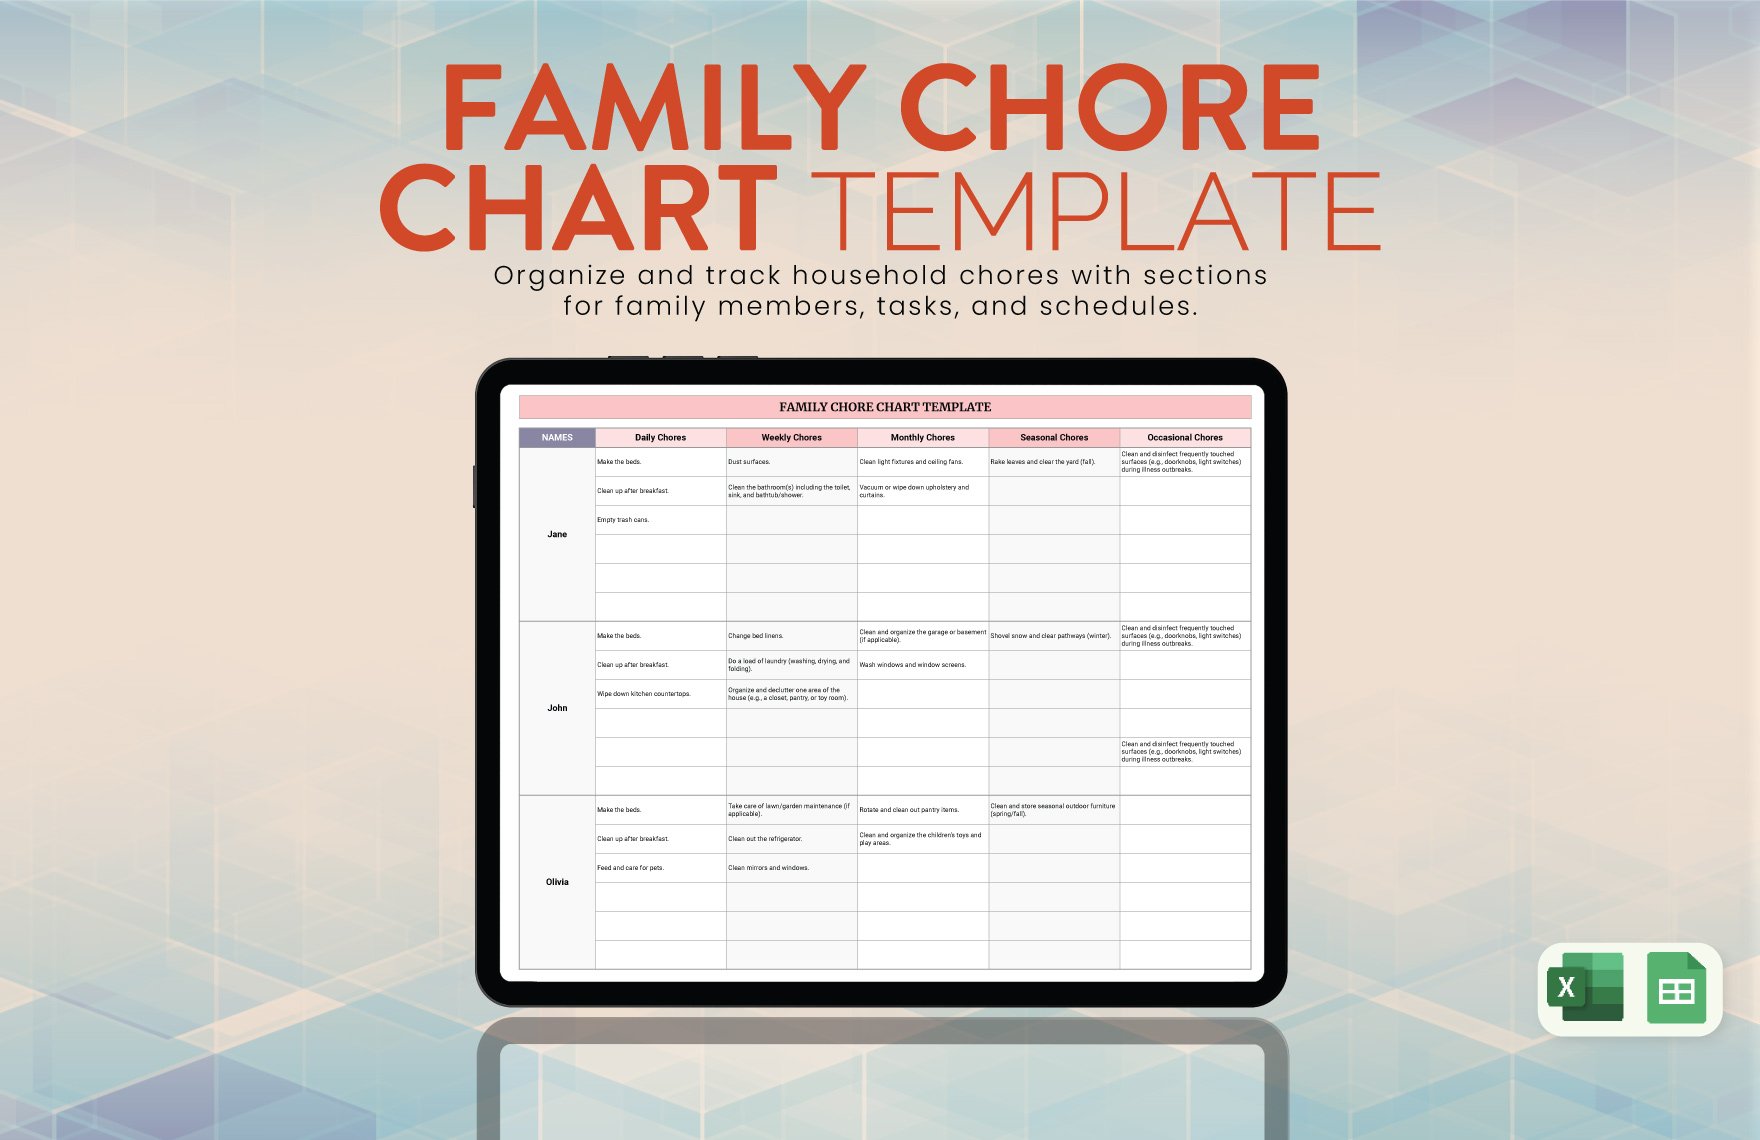 Family Chore Chart Template in Excel, Google Sheets